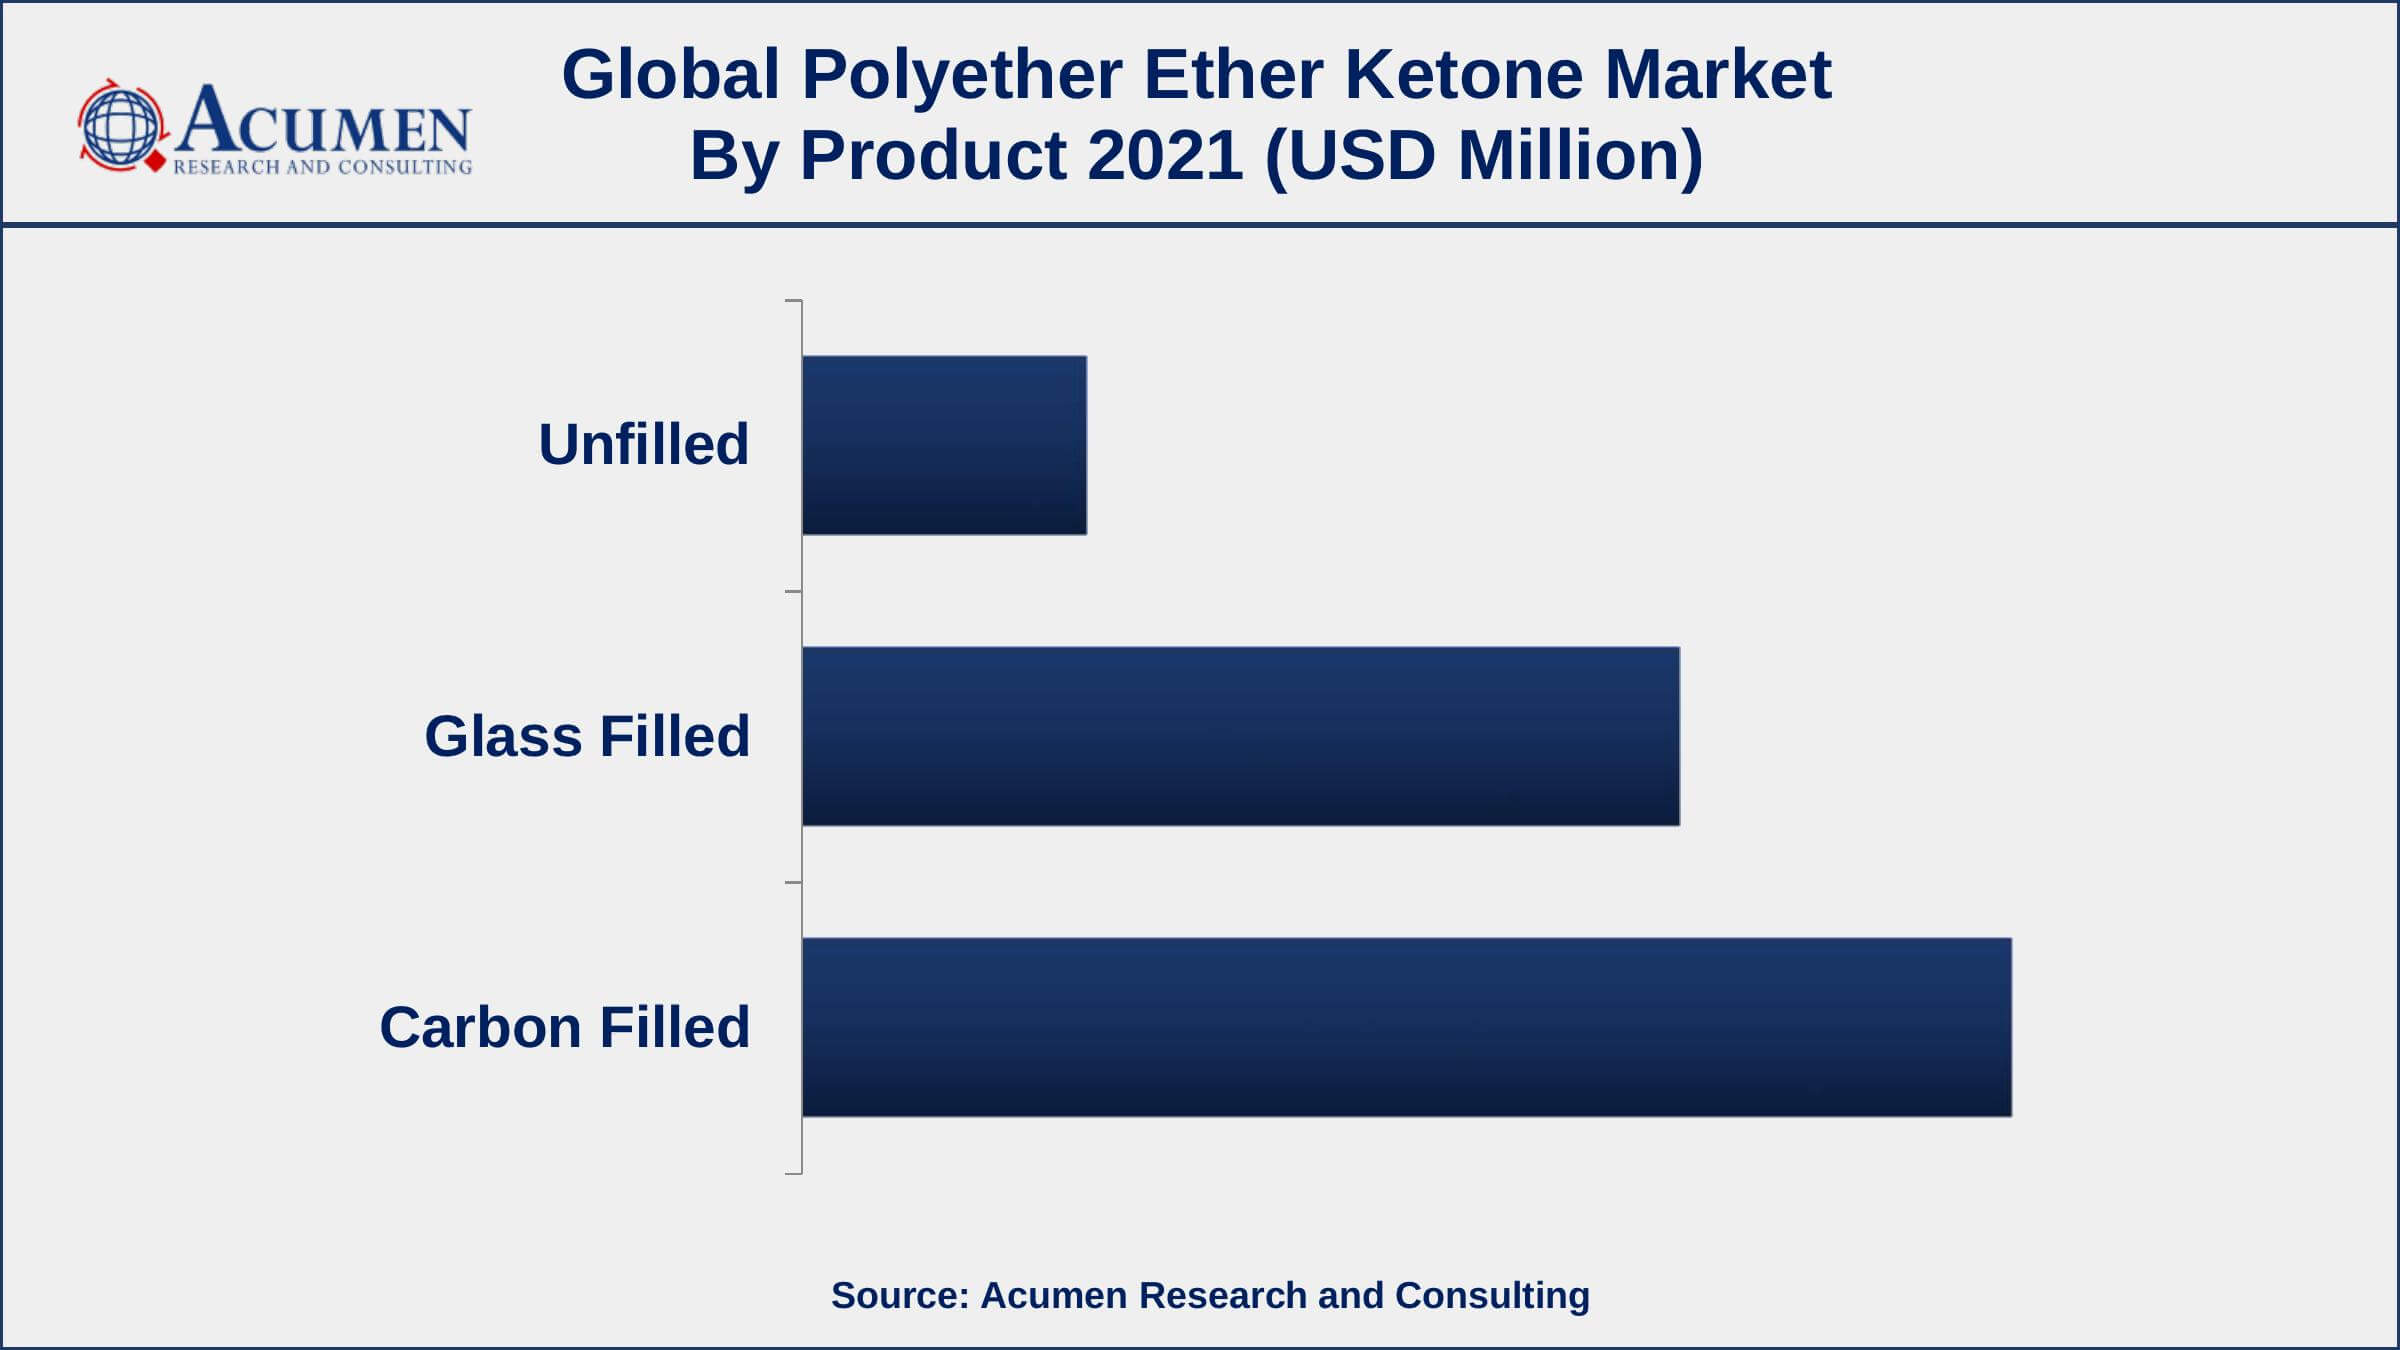 Based on product, carbon-filled segment accounted for over 51.2% of the overall market share in 2021